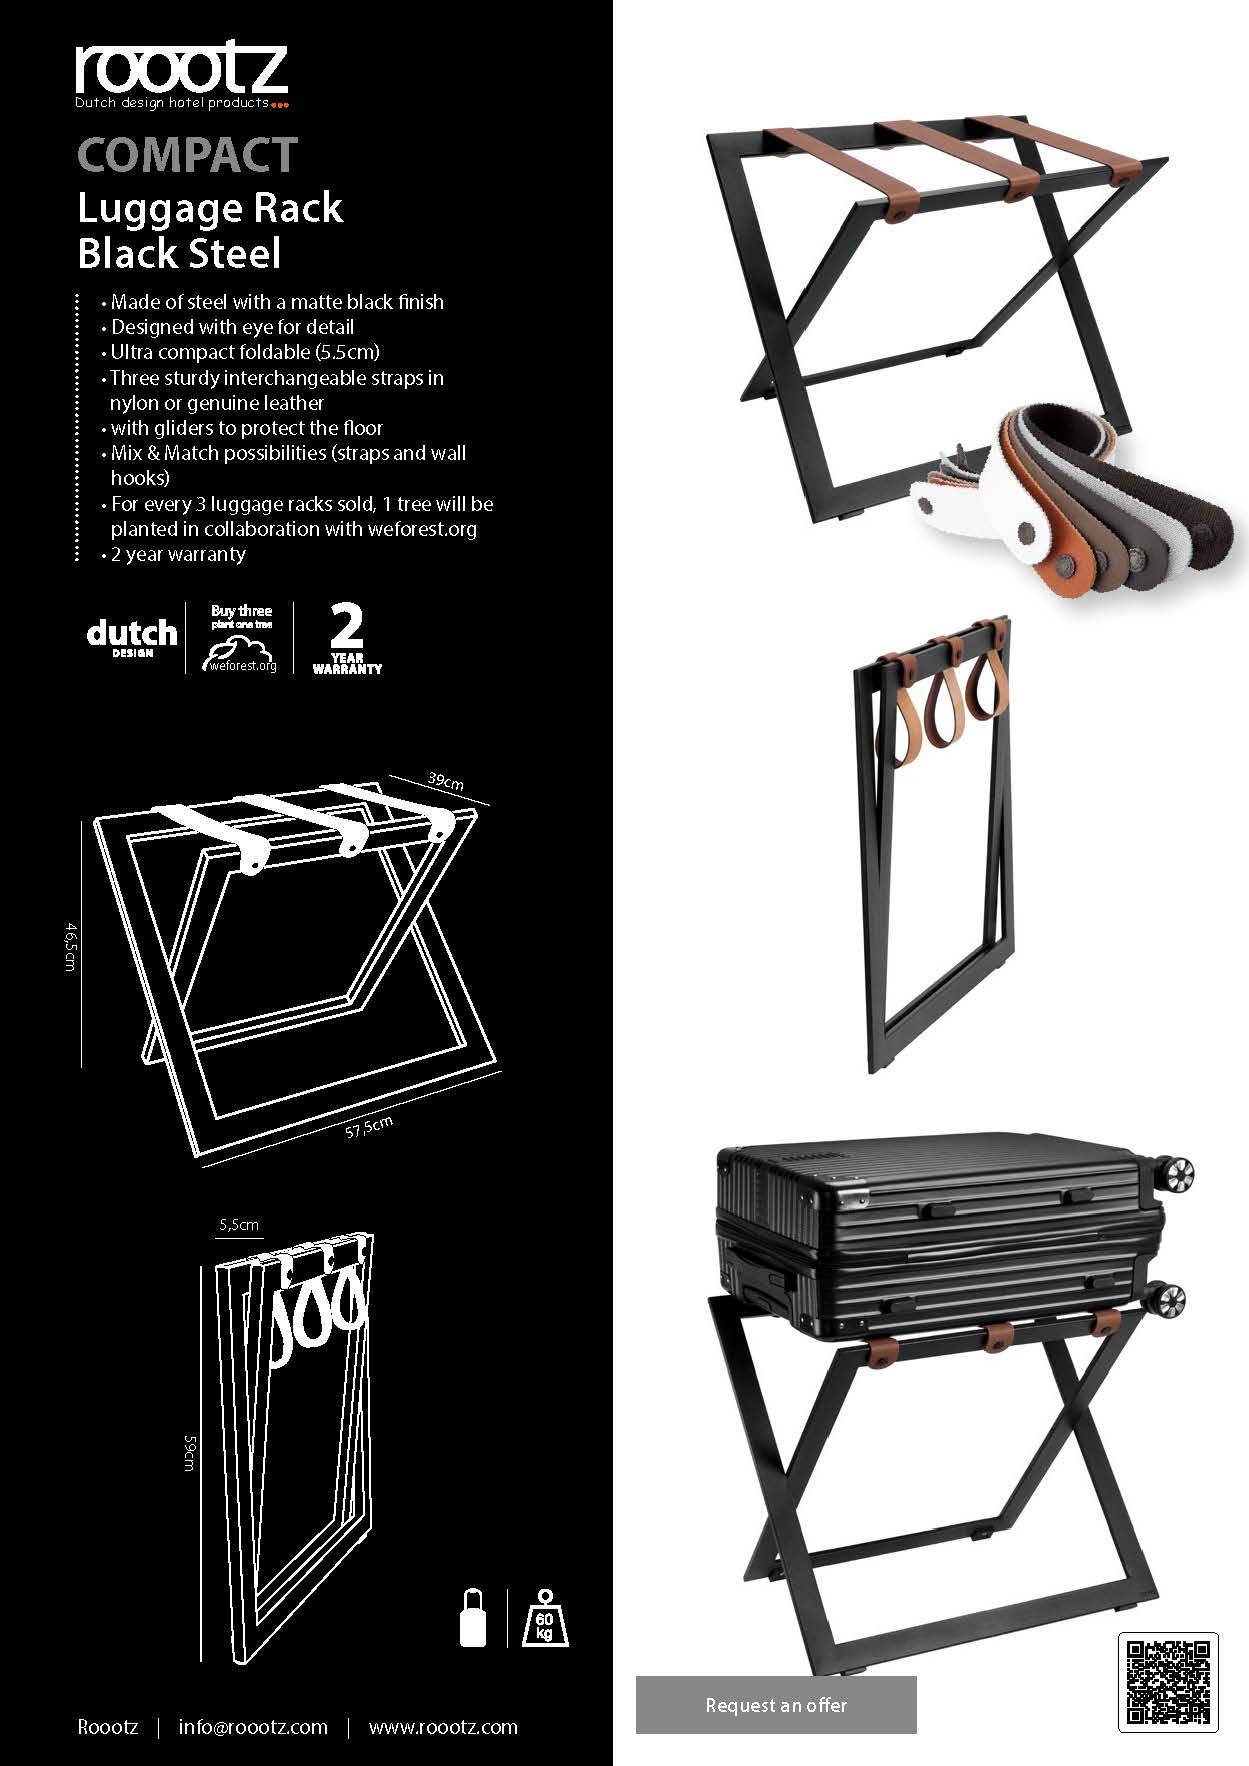 Luggage rack for hotel black steel with leather or nylon straps